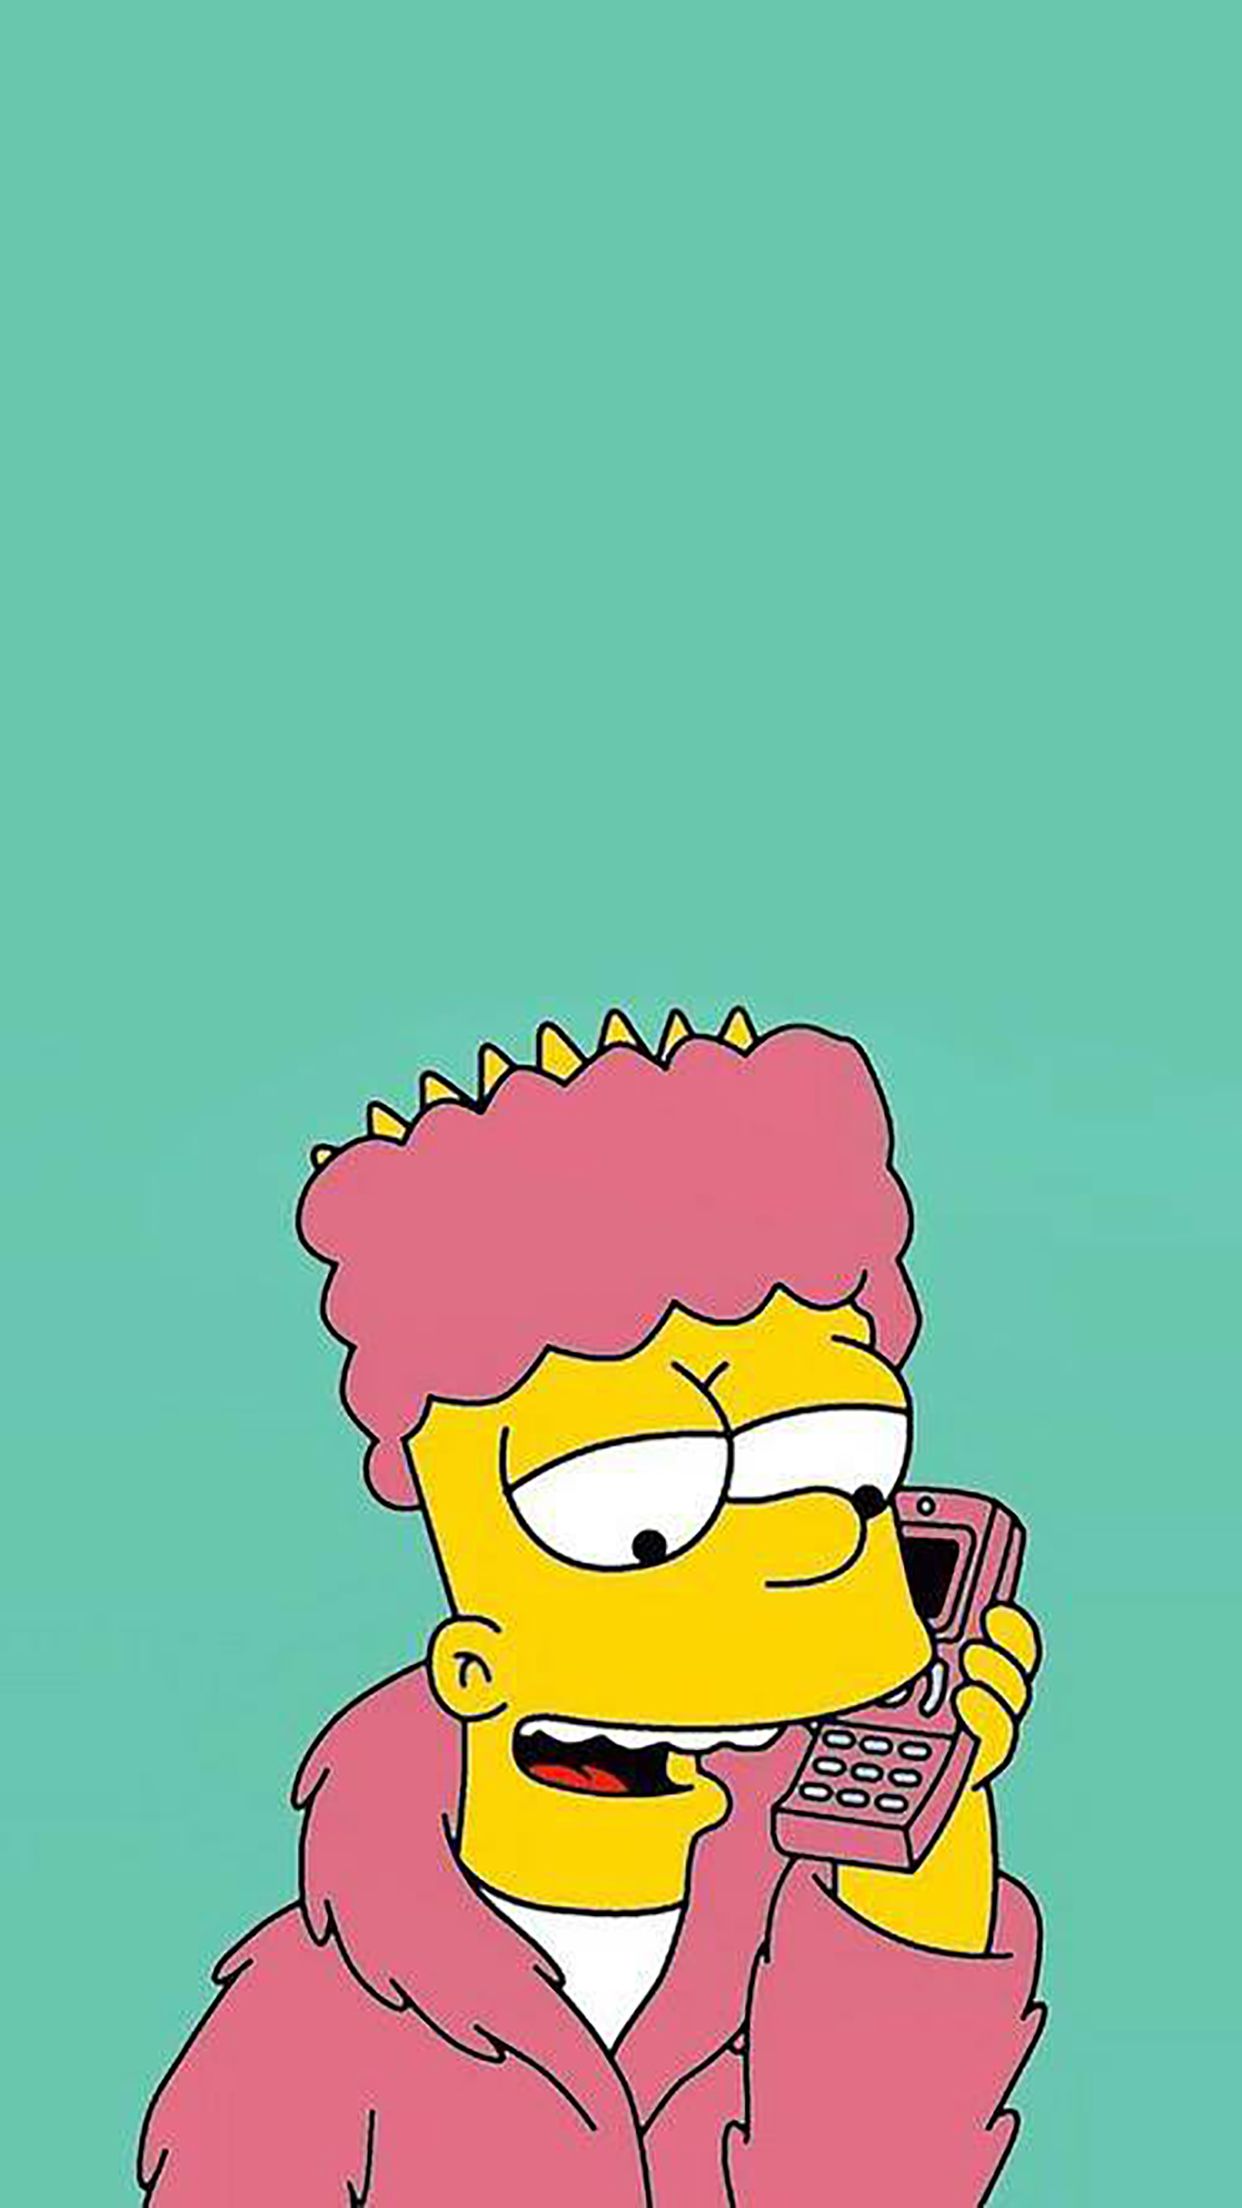 Bart Simpson Wallpaper for iPhone Pro Max, X, 6